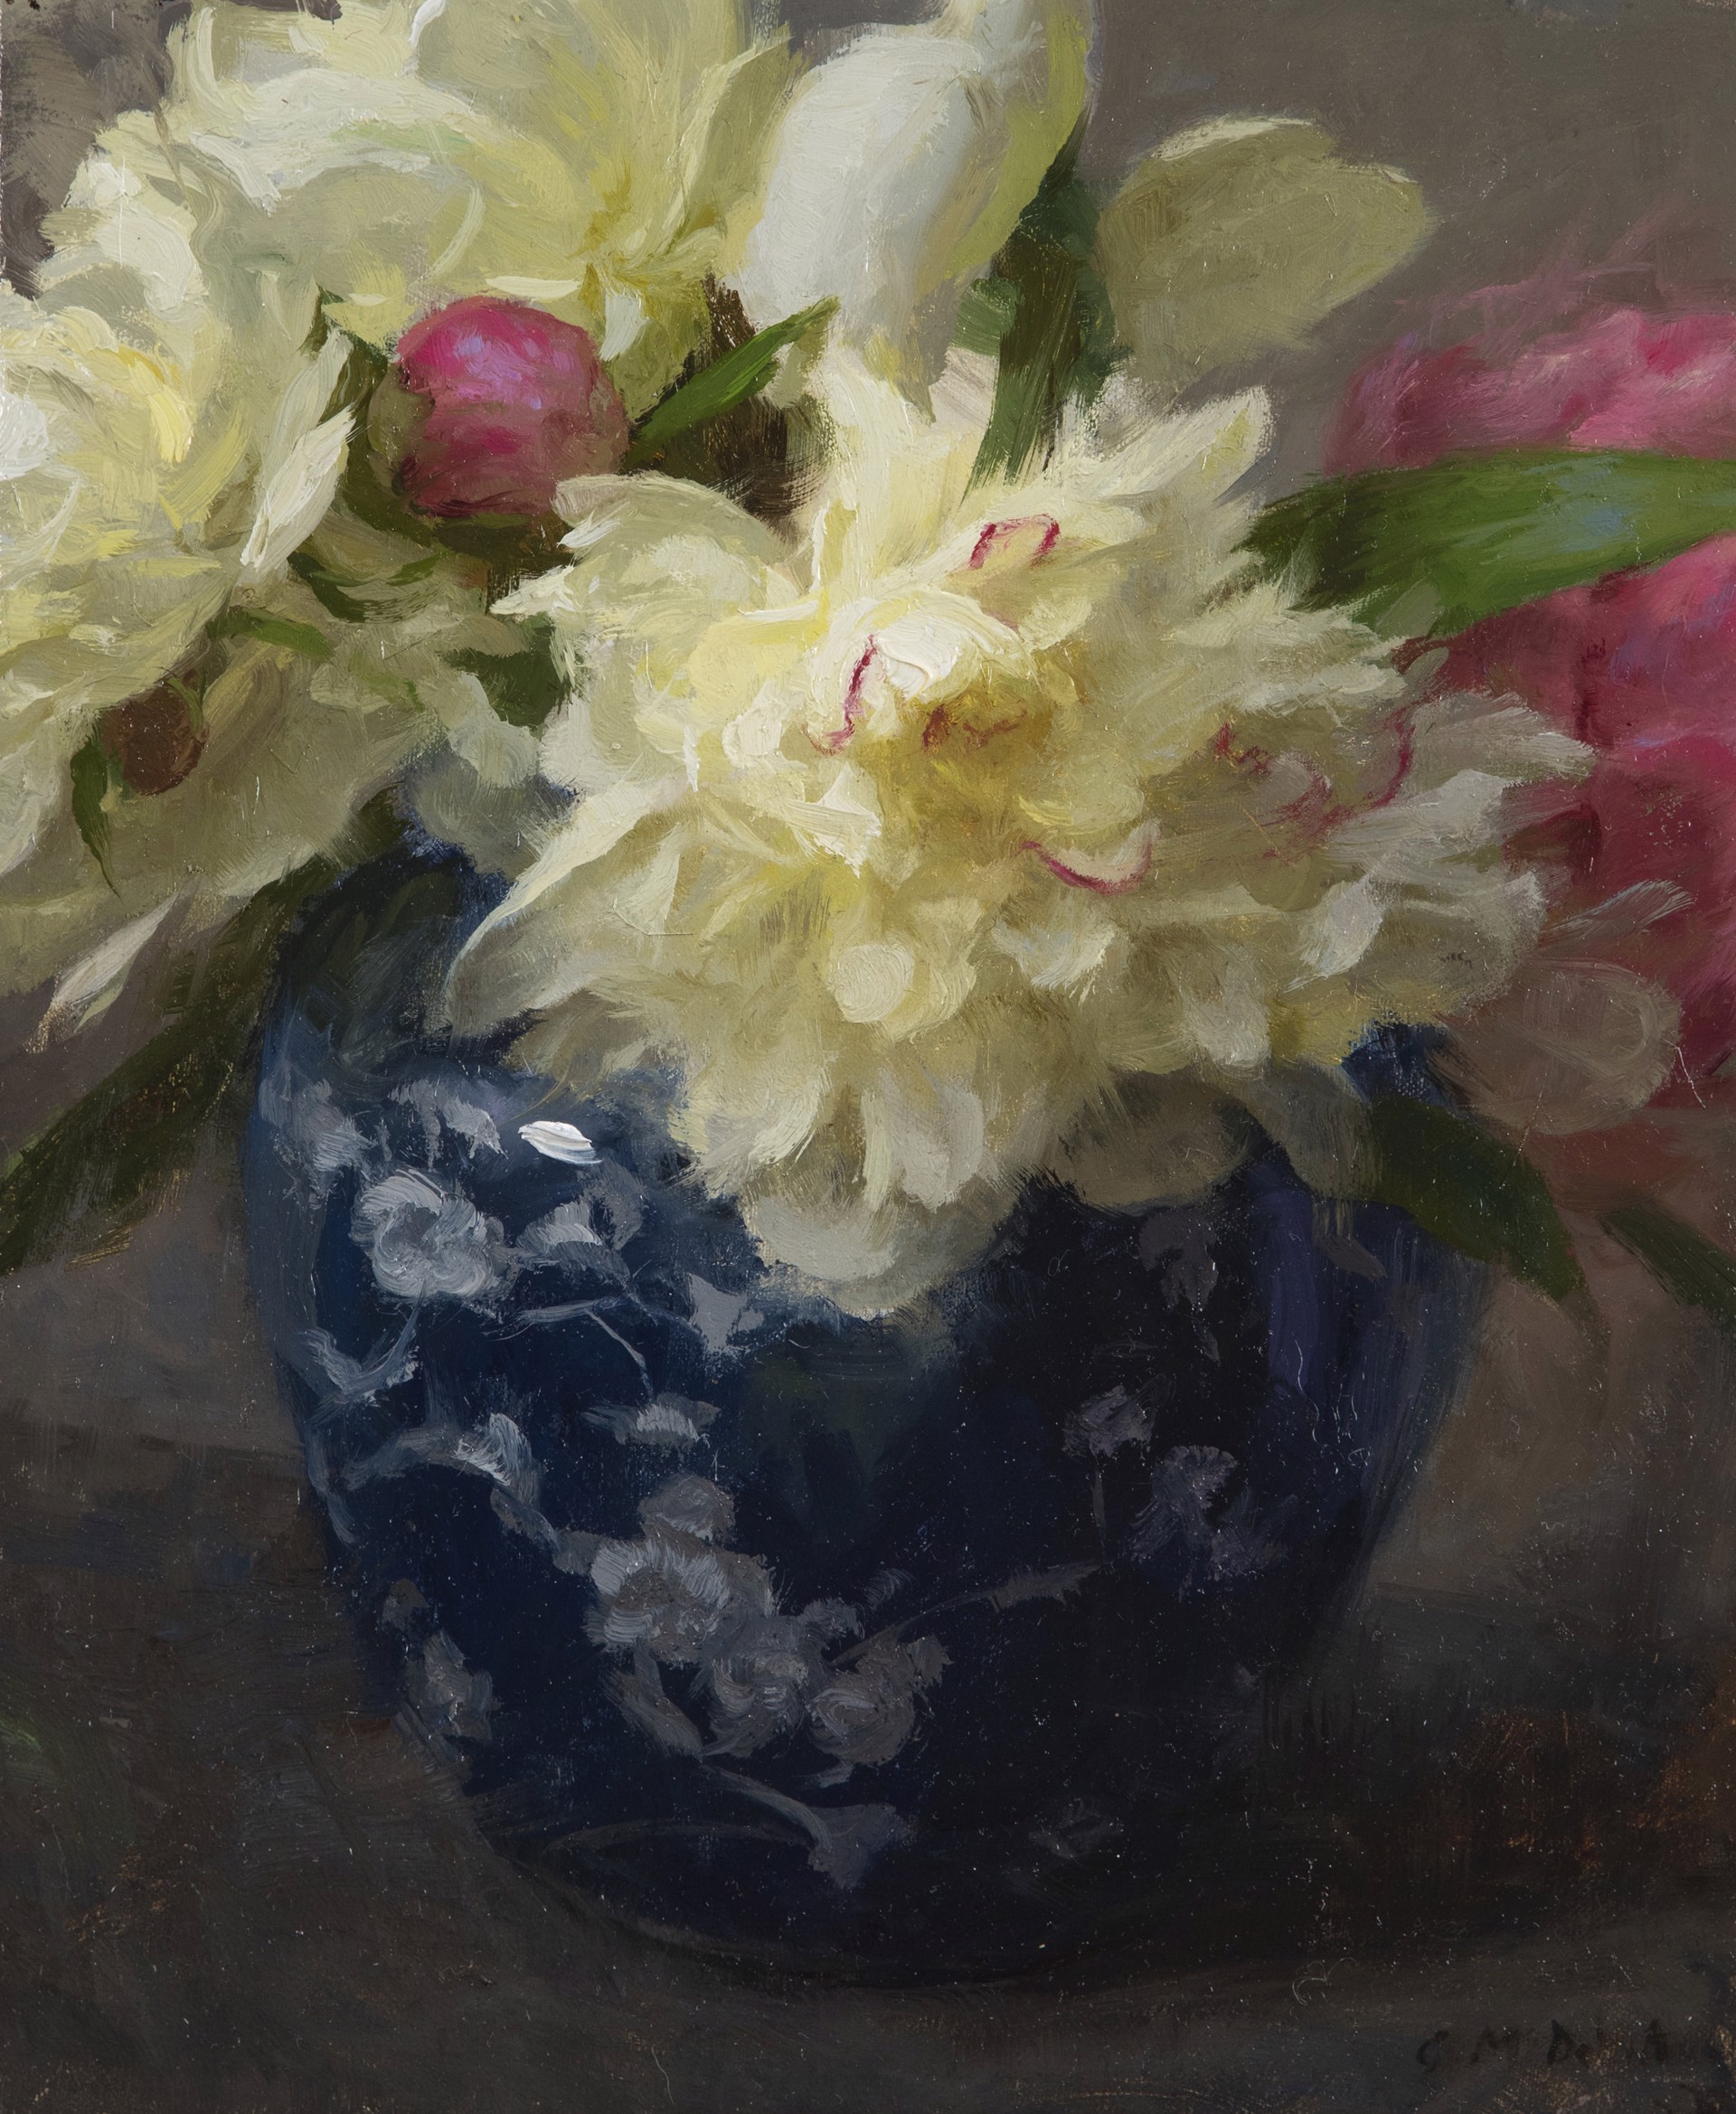 Ginger Jar and Peonies by Grace Devito